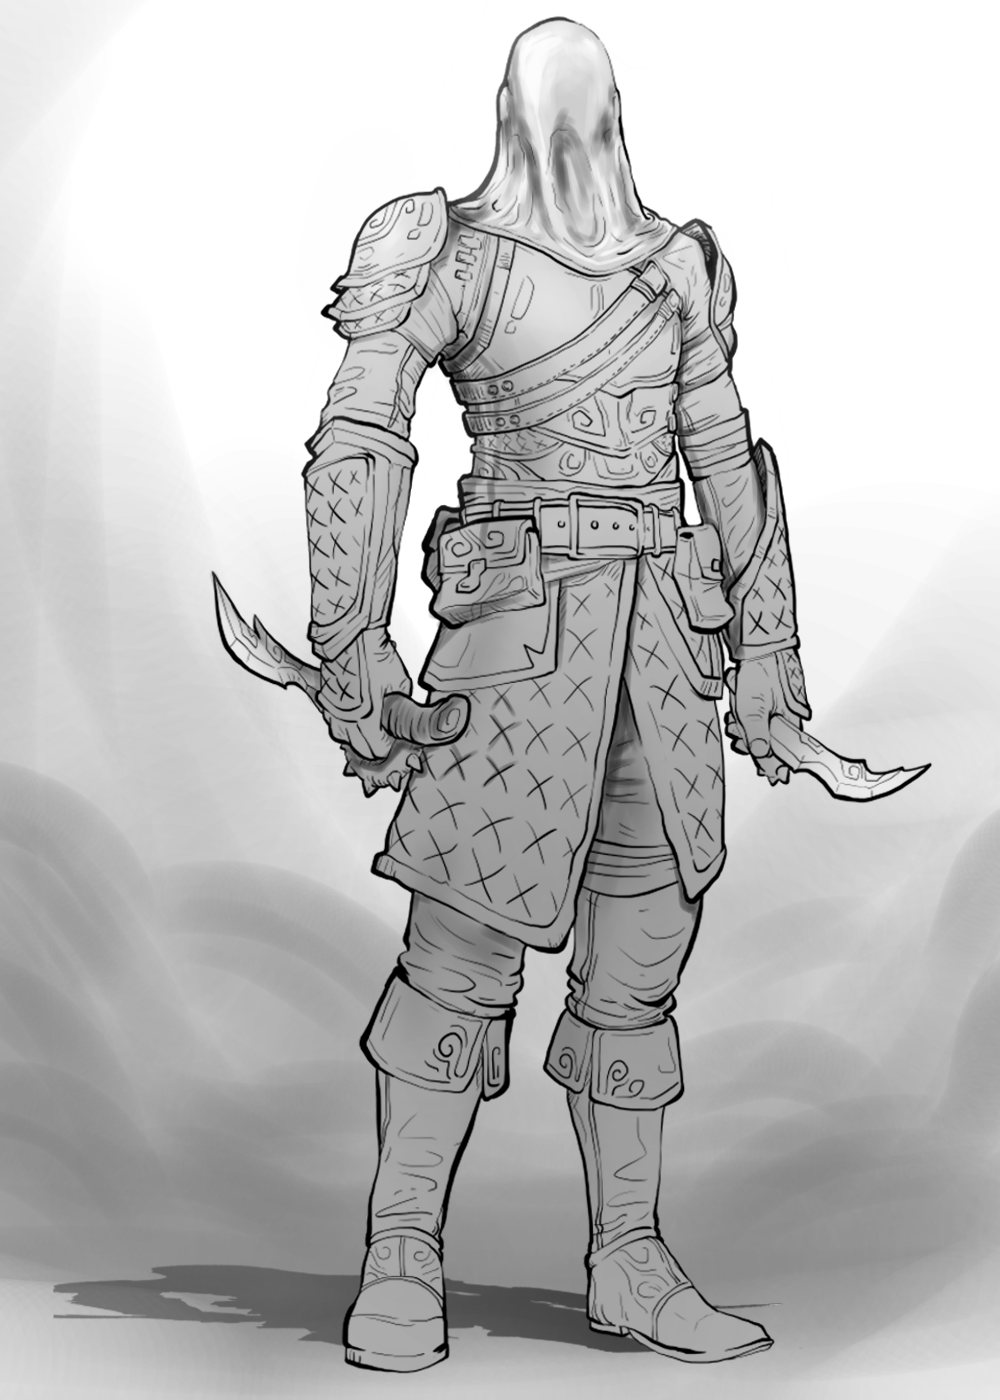 Assassin's Creed Rogue character_00 by drazebot on DeviantArt